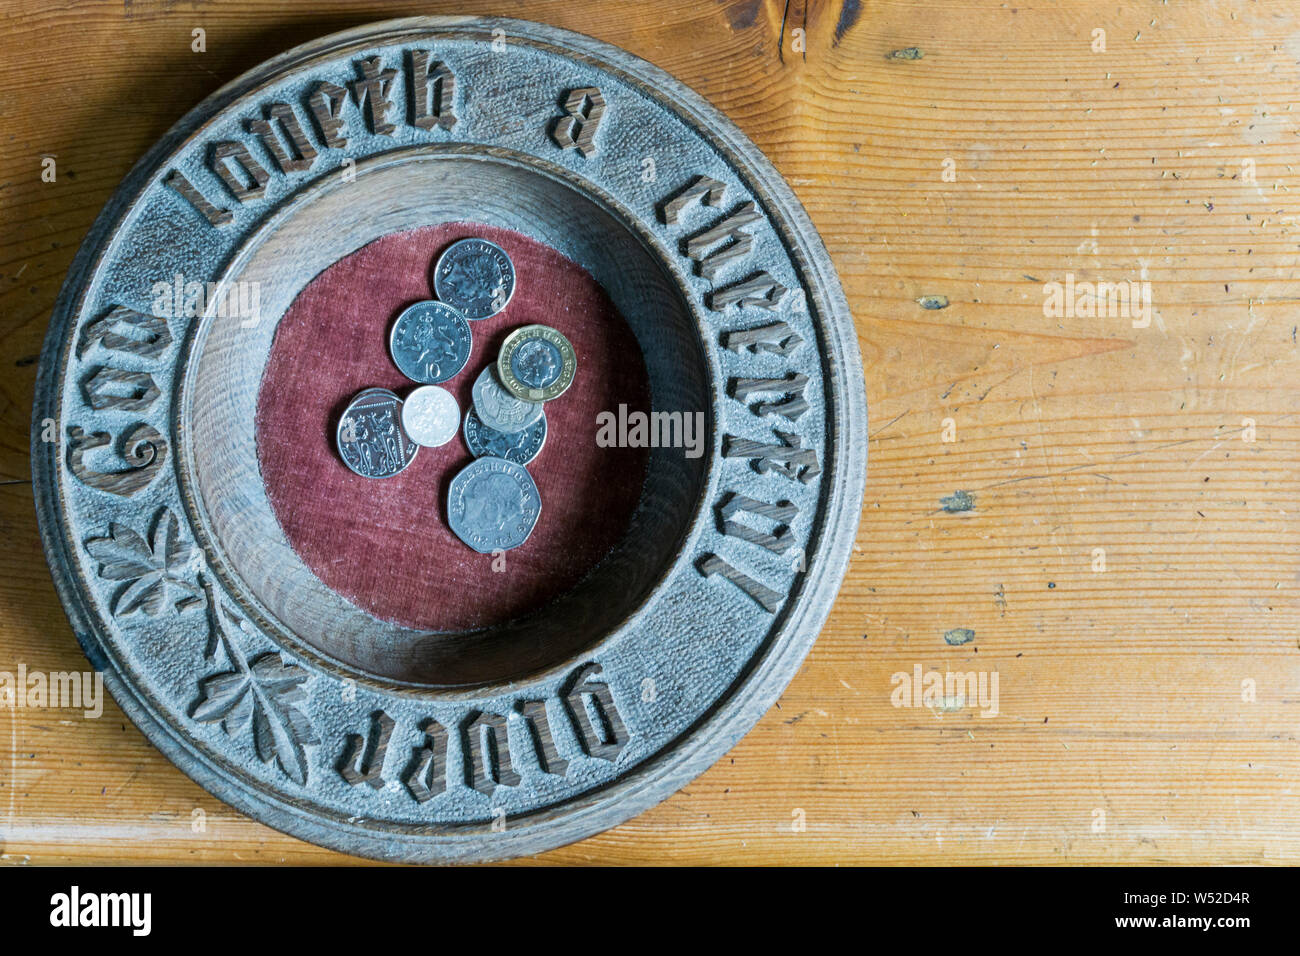 Money on a church collection plate. With 'God Loveth a Cheerful Giver' carved round the side. Stock Photo